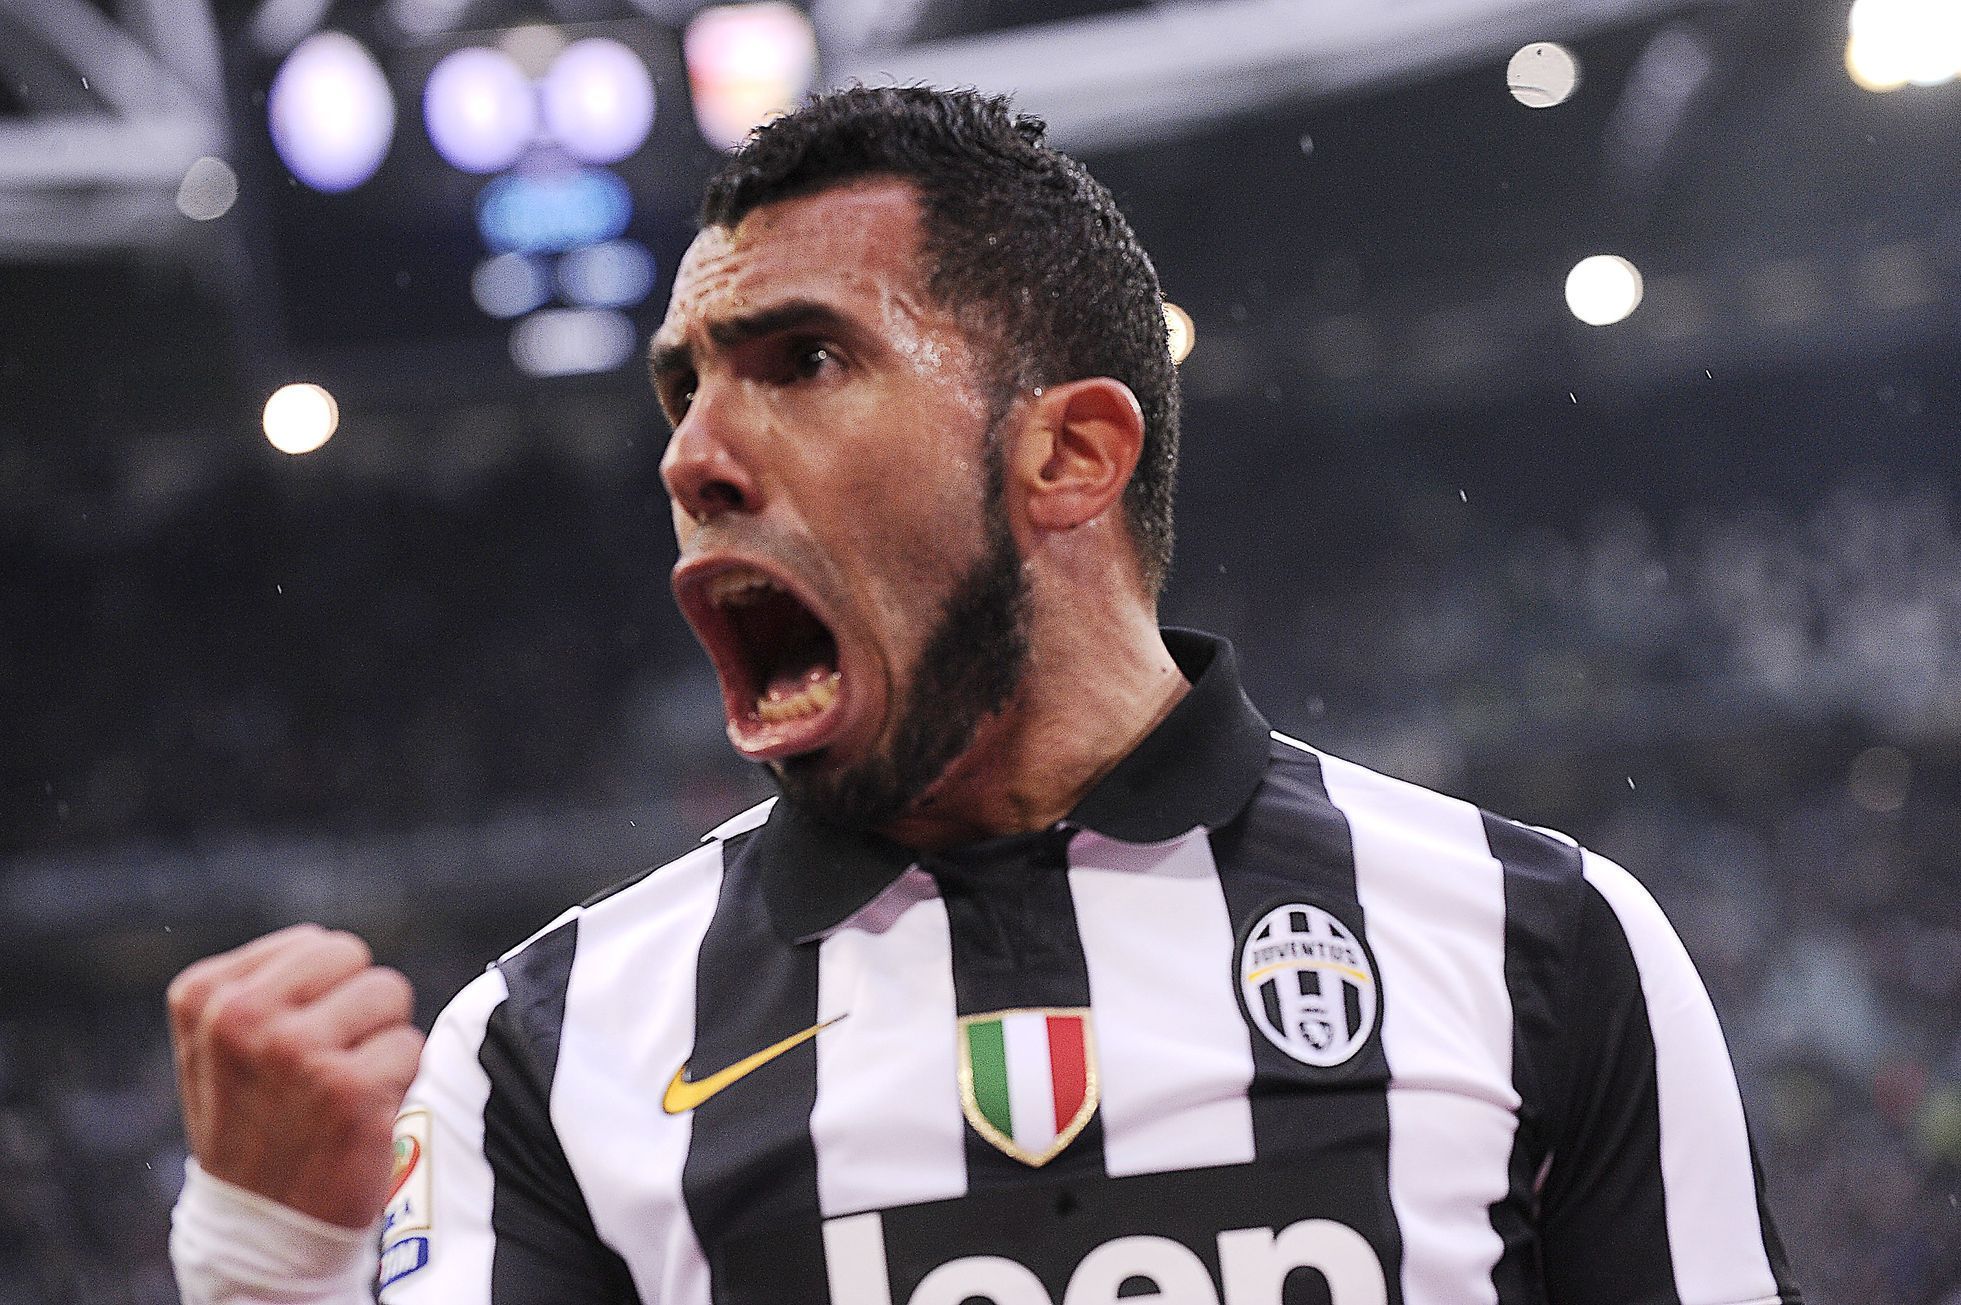 Juventus' Carlos Tevez celebrates after scoring against Genoa during their Italian Serie A soccer match in Turin